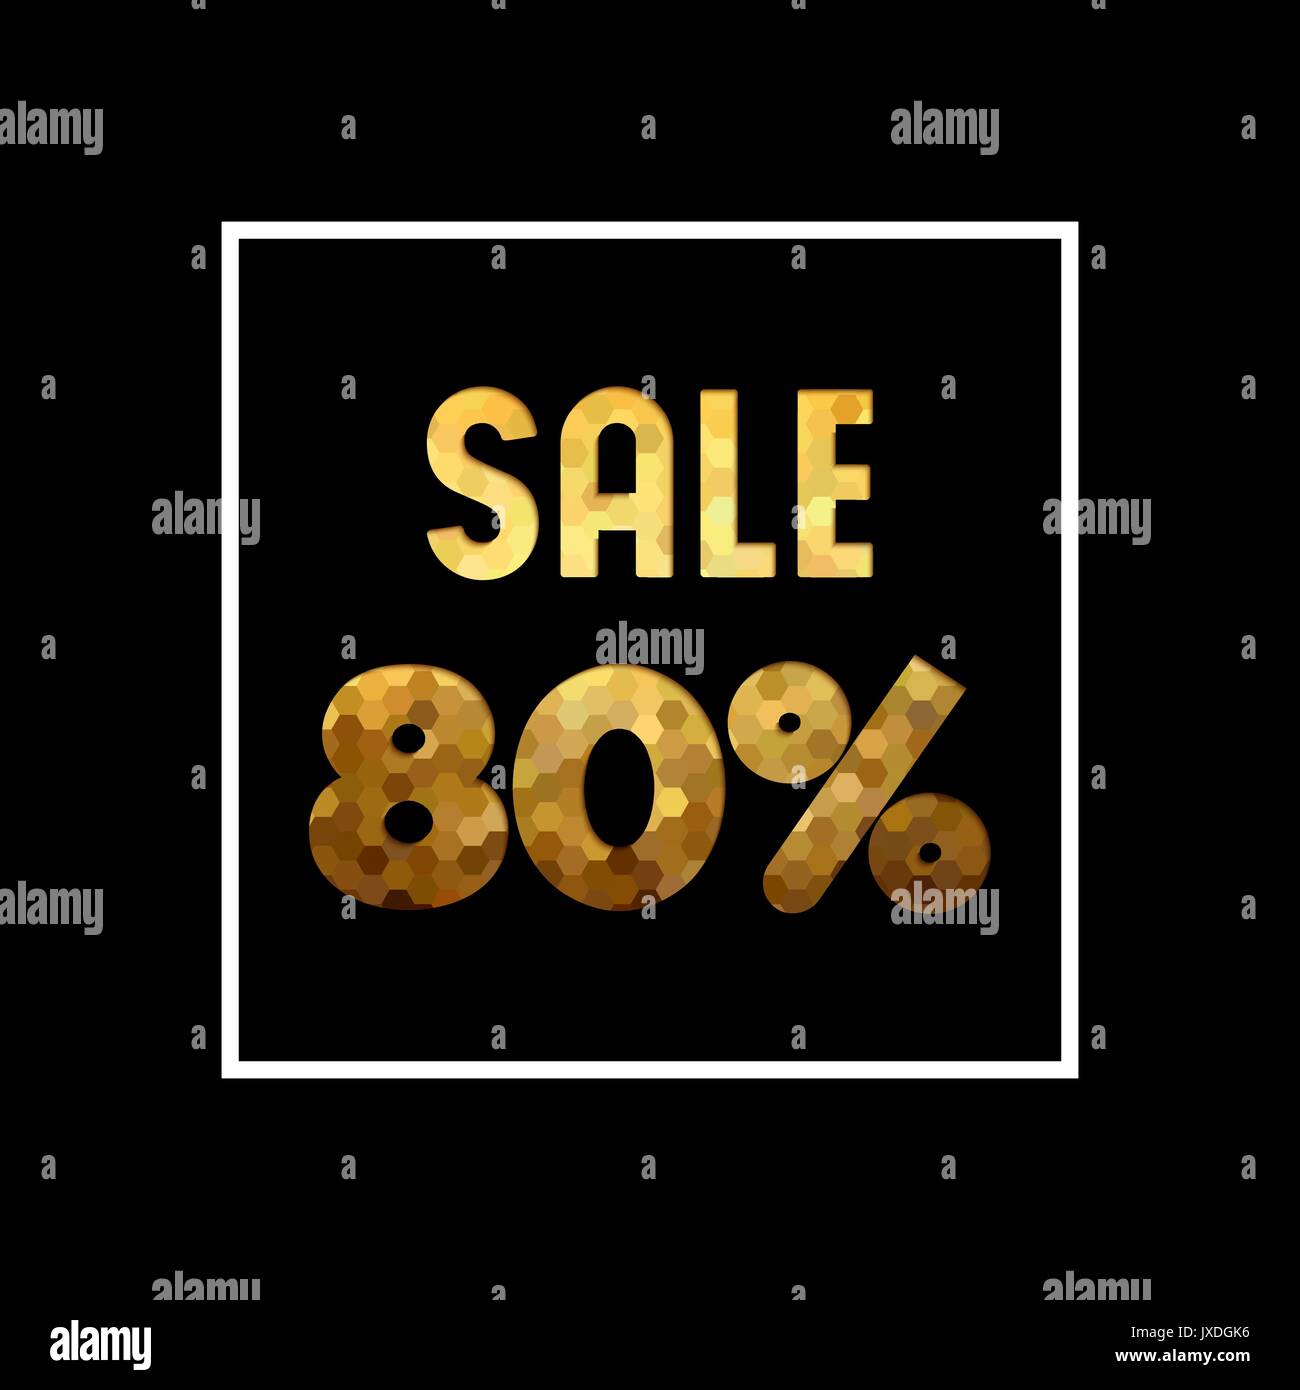 Sale 80% off gold text quote, luxury typography in paper cut style. Special offer discount advertising for retail business. EPS10 vector. Stock Vector